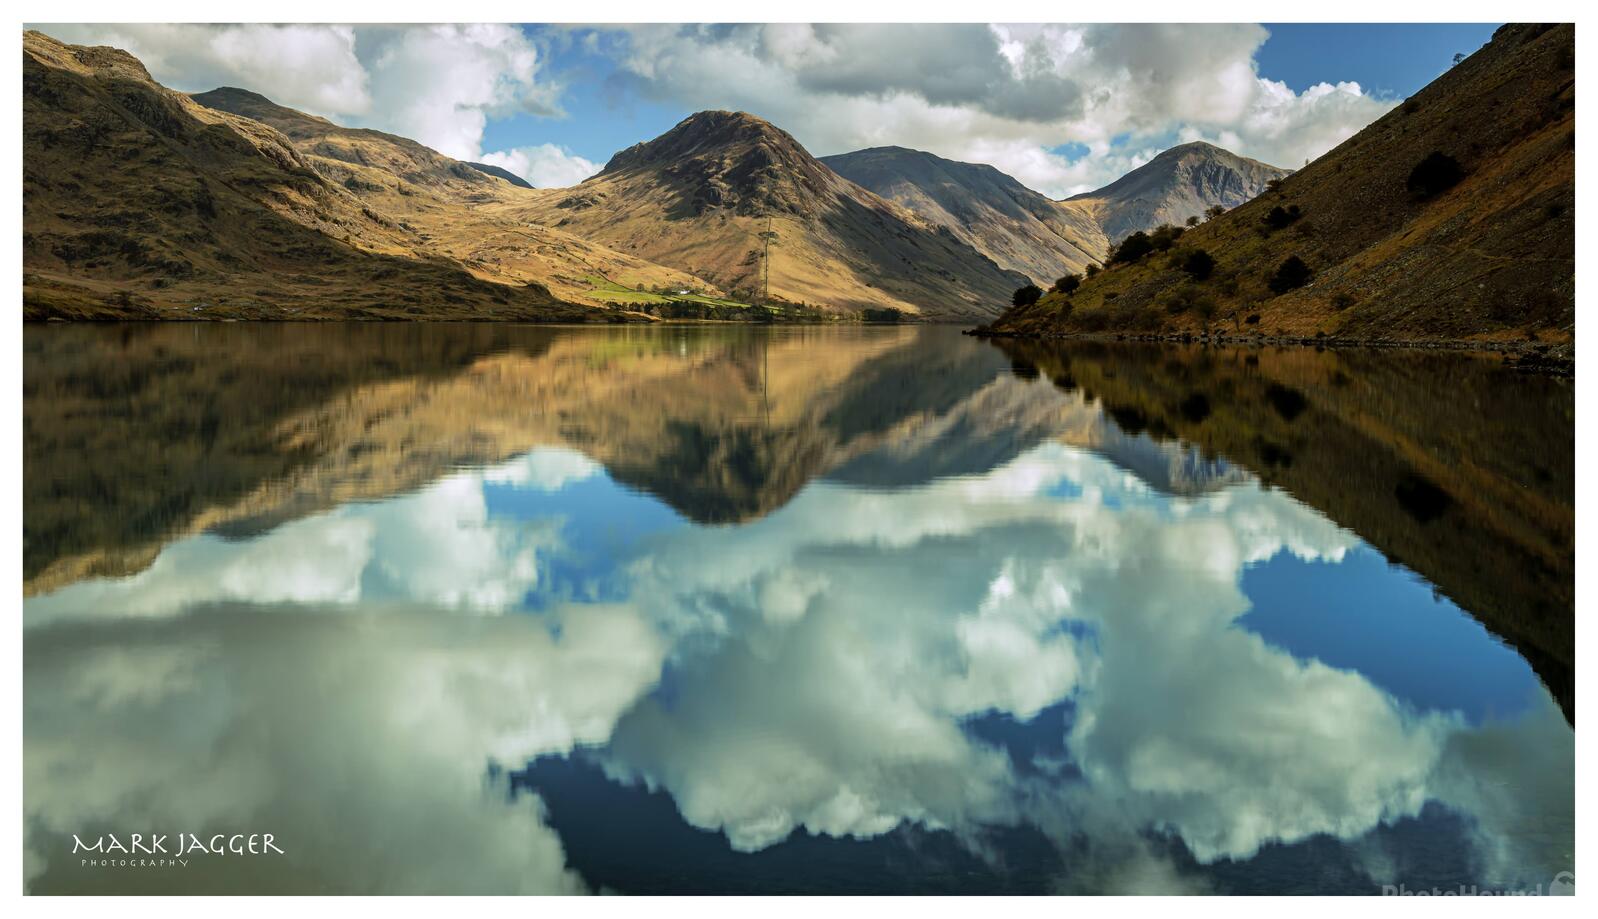 Image of Wast Water, Lake District by Mark Jagger